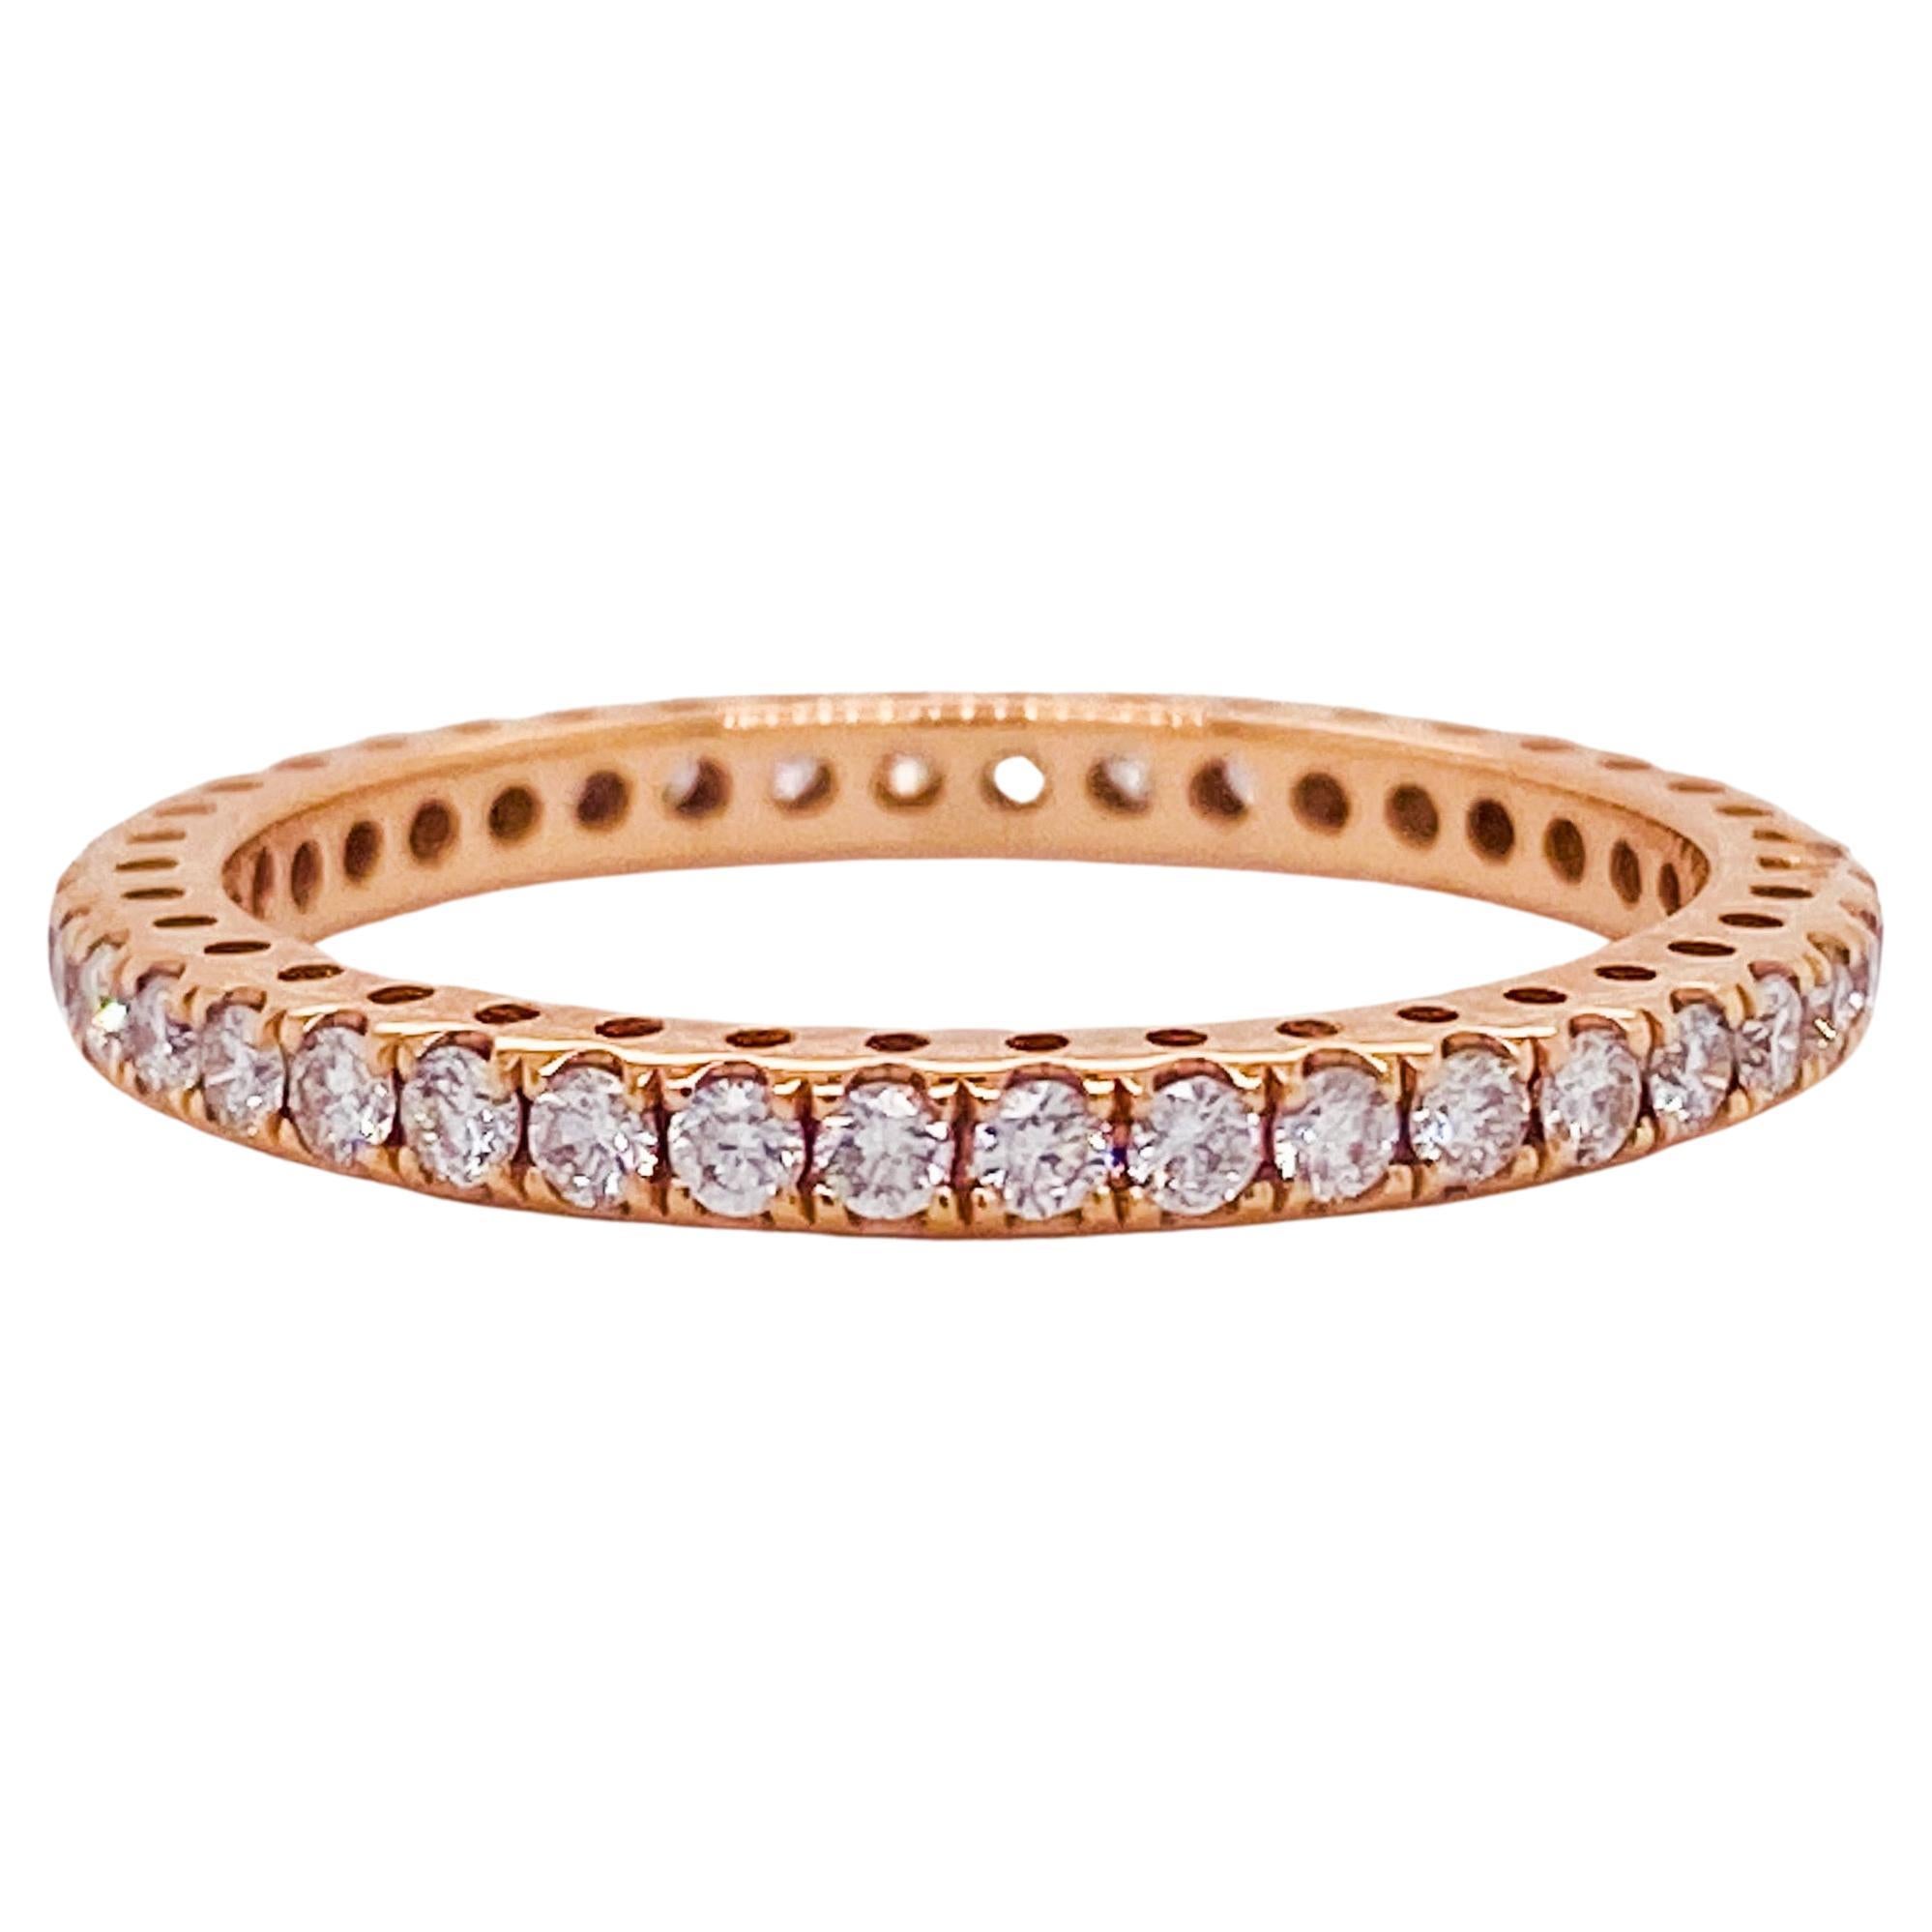 For Sale:  Diamond Eternity Band in 18k Rose Gold .54cttw Half Carat Stackable Ring